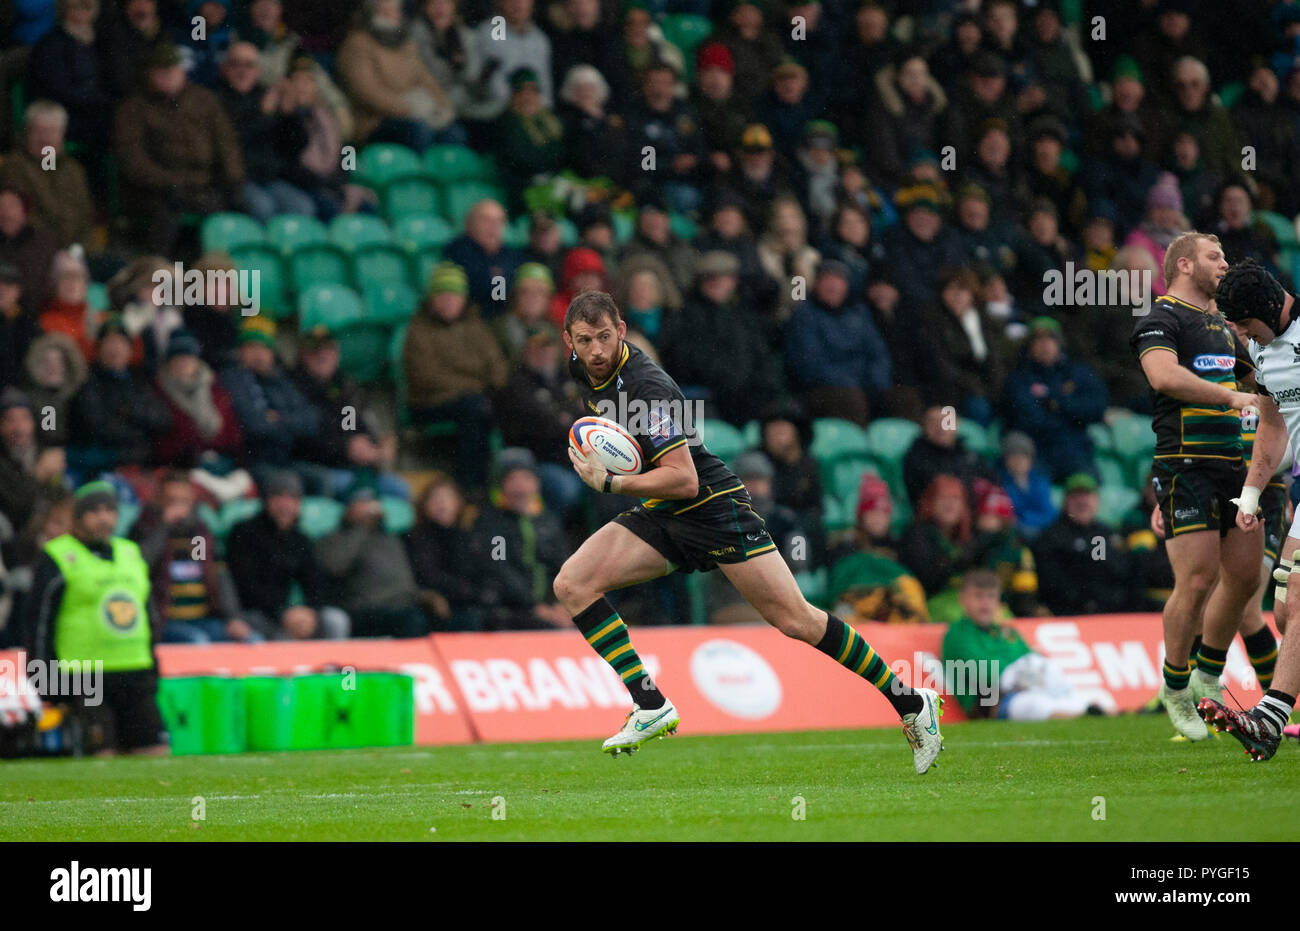 Northampton, UK. 27th October 2018. Tom Wood of Northampton Saints during the Premiership Rugby Cup match between Northampton Saints and Bristol Bears. Andrew Taylor/Alamy Live News Stock Photo